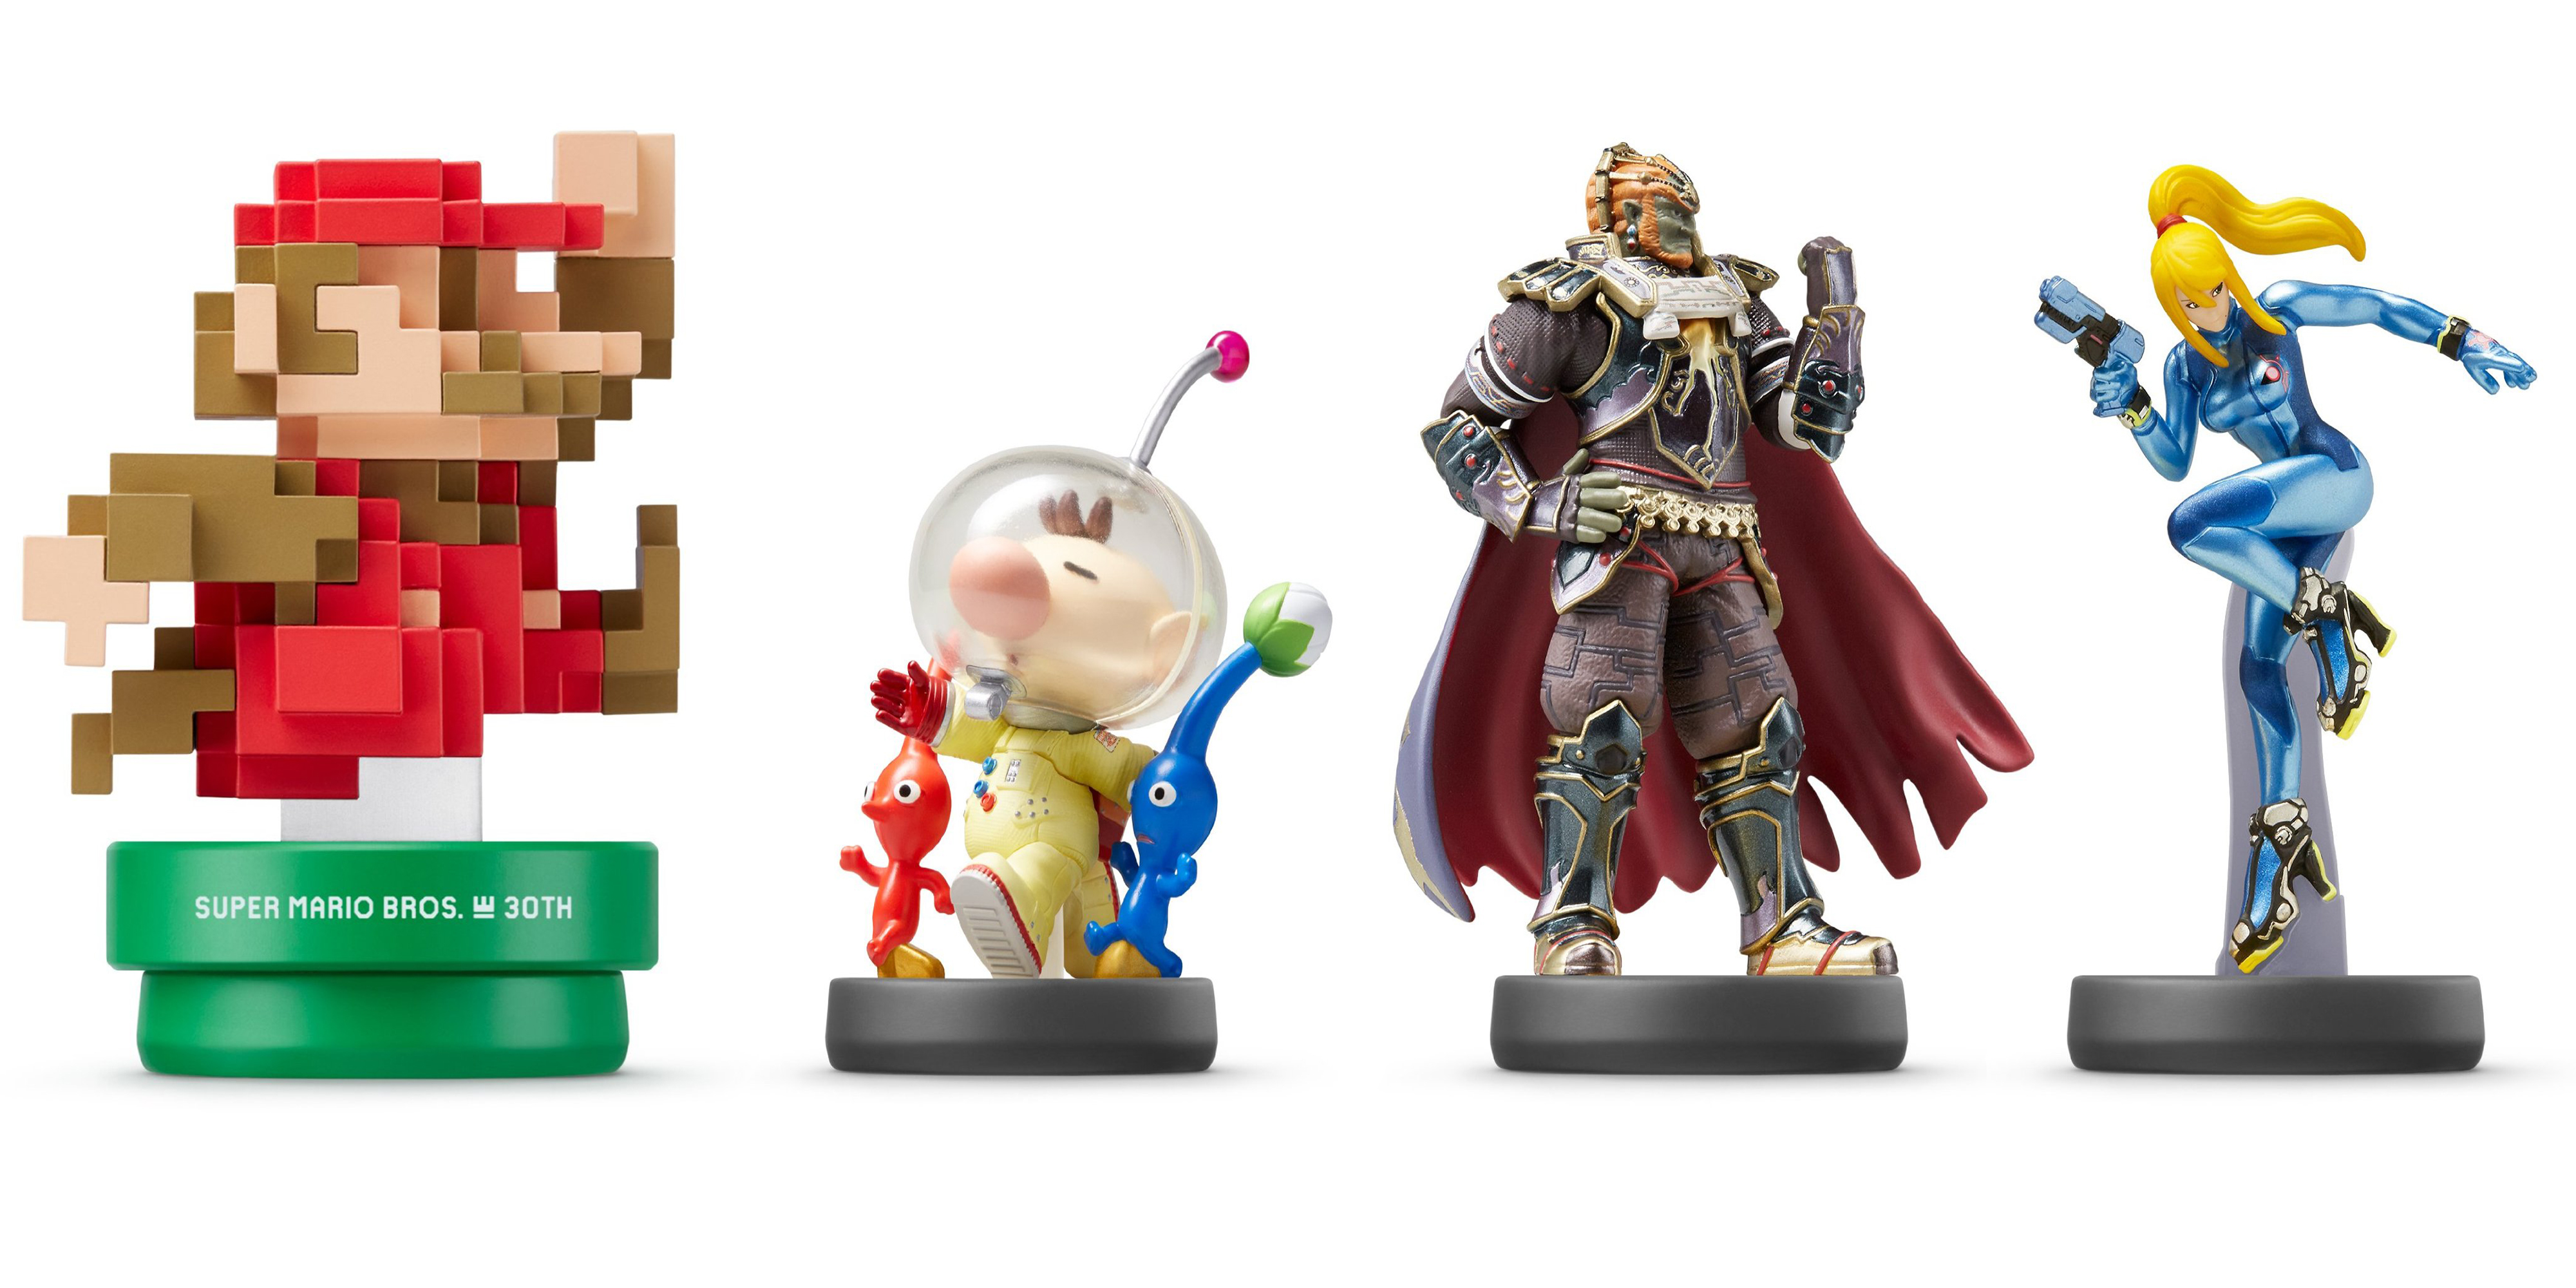 Your chance to snag today's new amiibo figures on Amazon starts later